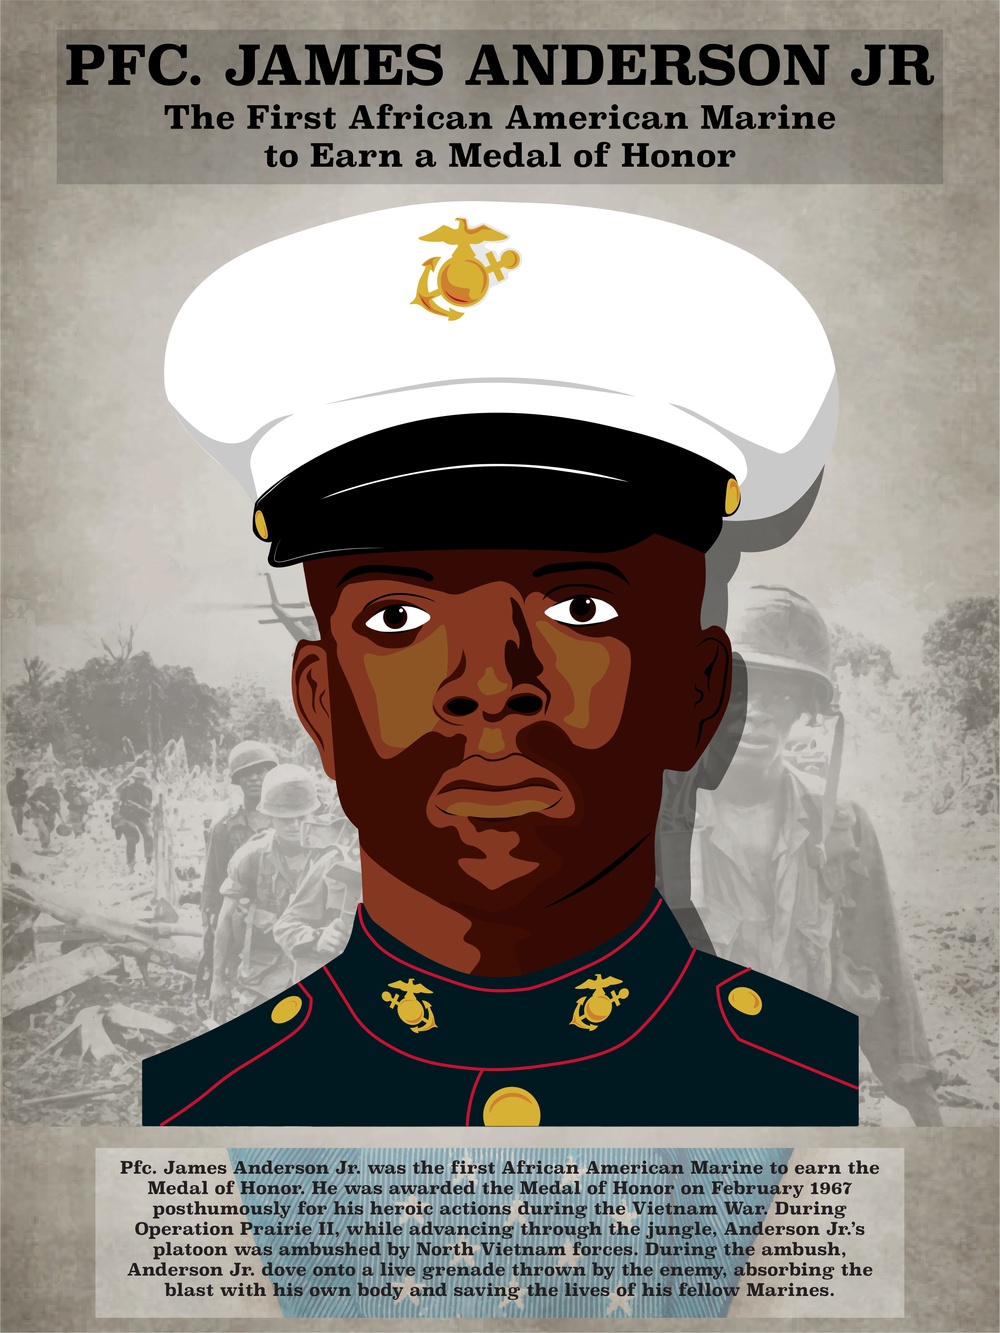 The First African American Marine to Earn the Medal of Honor - Pfc. James Anderson Jr.